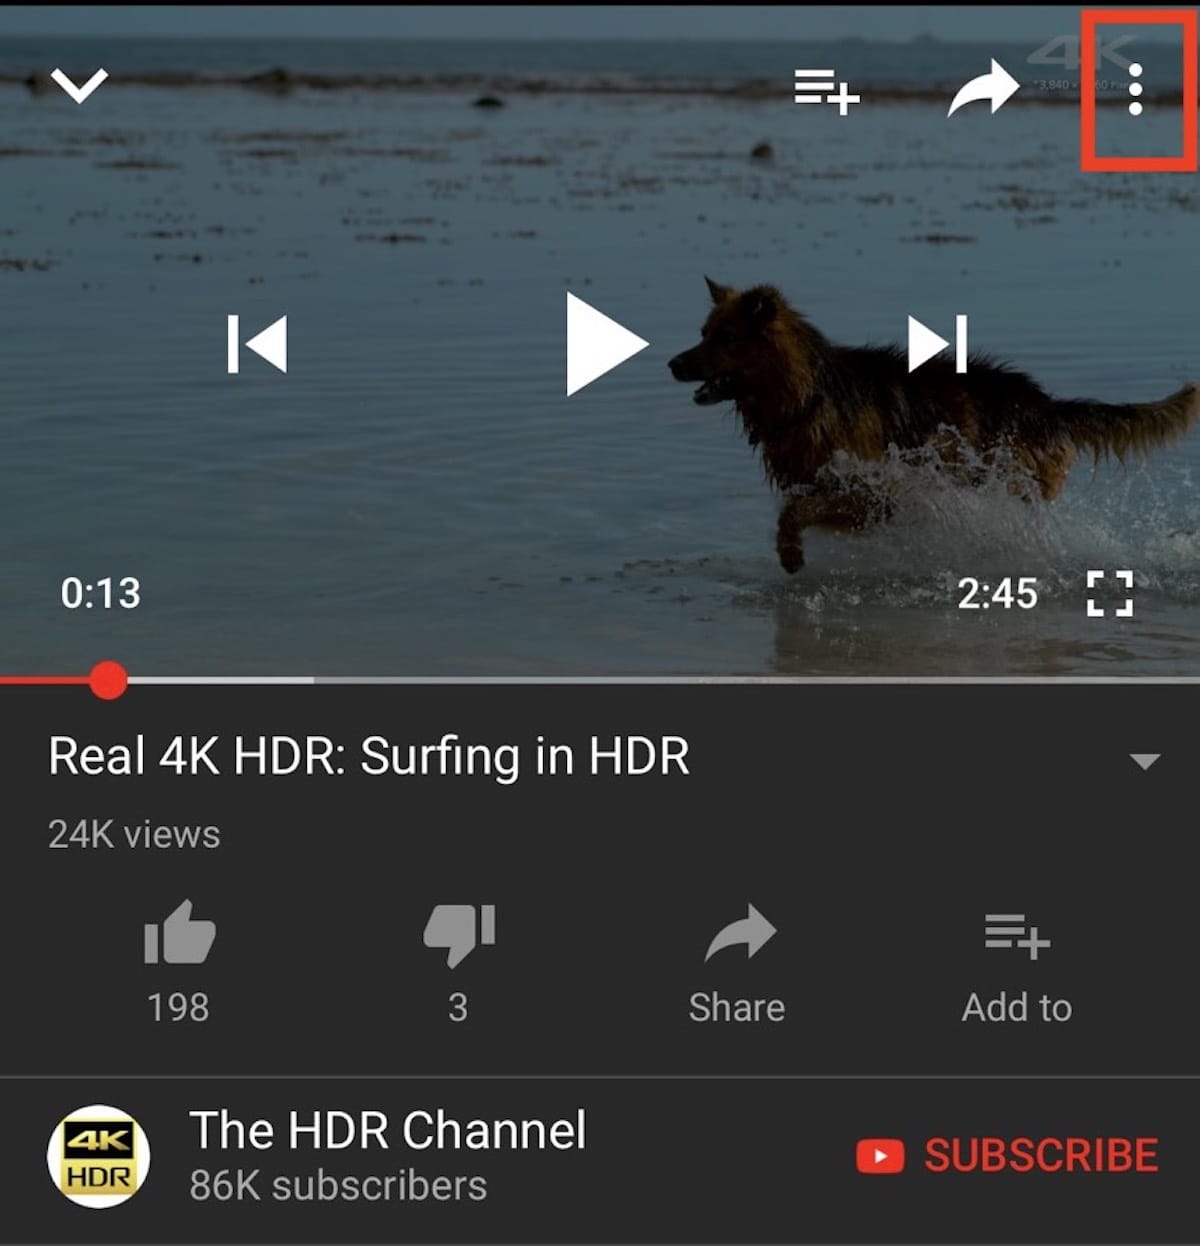 YouTubeが最新iPhoneでのHDR再生に対応！リアルな空気感が伝わる動画を体感！ technology180511_youtube-iphone-hdr_3-1200x1246